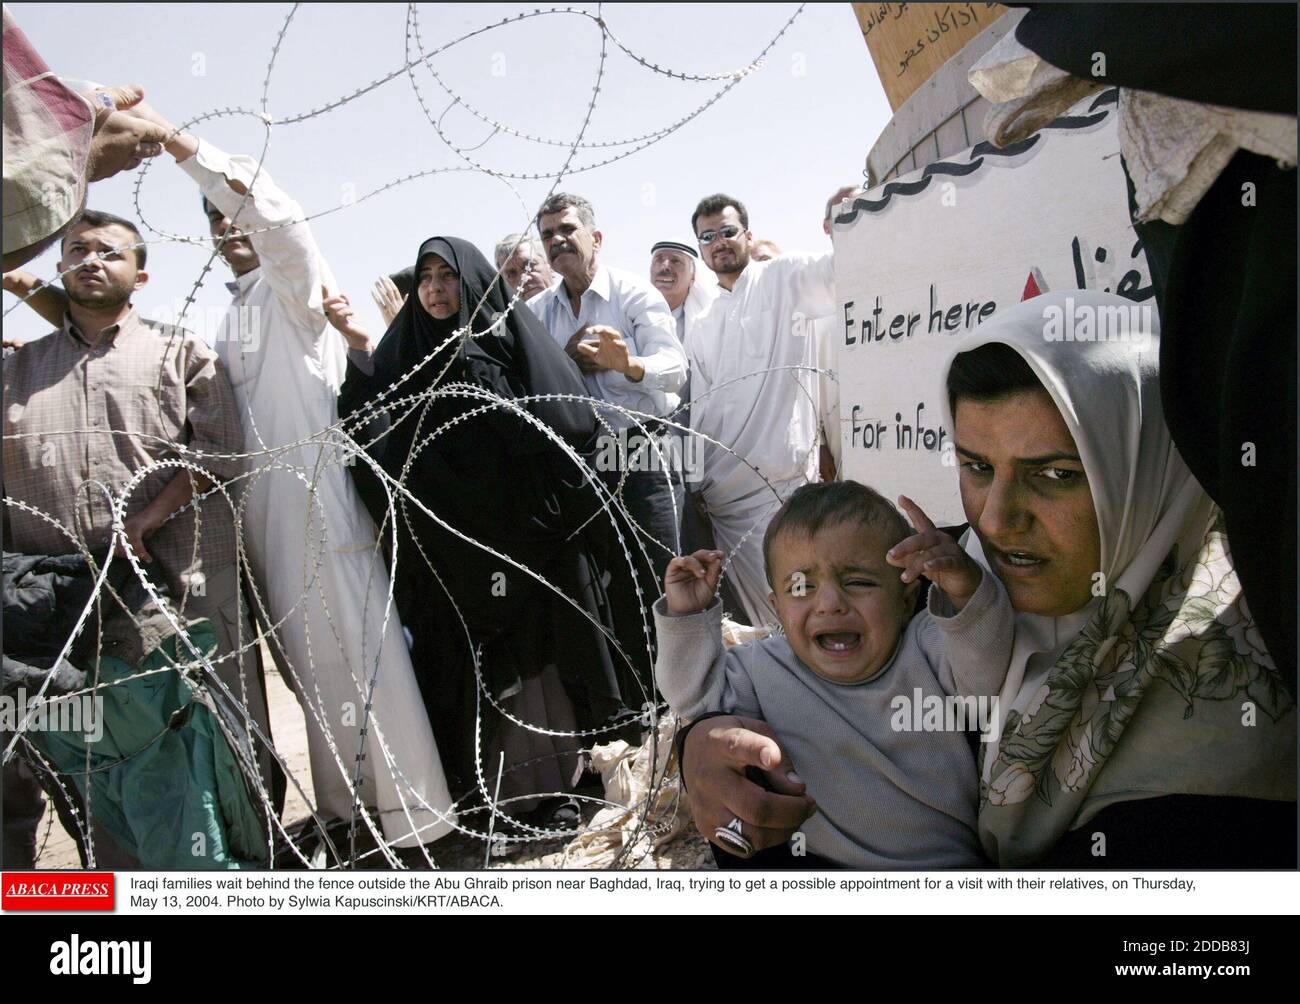 NO FILM, NO VIDEO, NO TV, NO DOCUMENTARY - Iraqi families wait behind the fence outside the Abu Ghraib prison near Baghdad, Iraq, trying to get a possible appointment for a visit with their relatives, on Thursday, May 13, 2004. Photo by Sylwia Kapuscinski/KRT/ABACA. Stock Photo